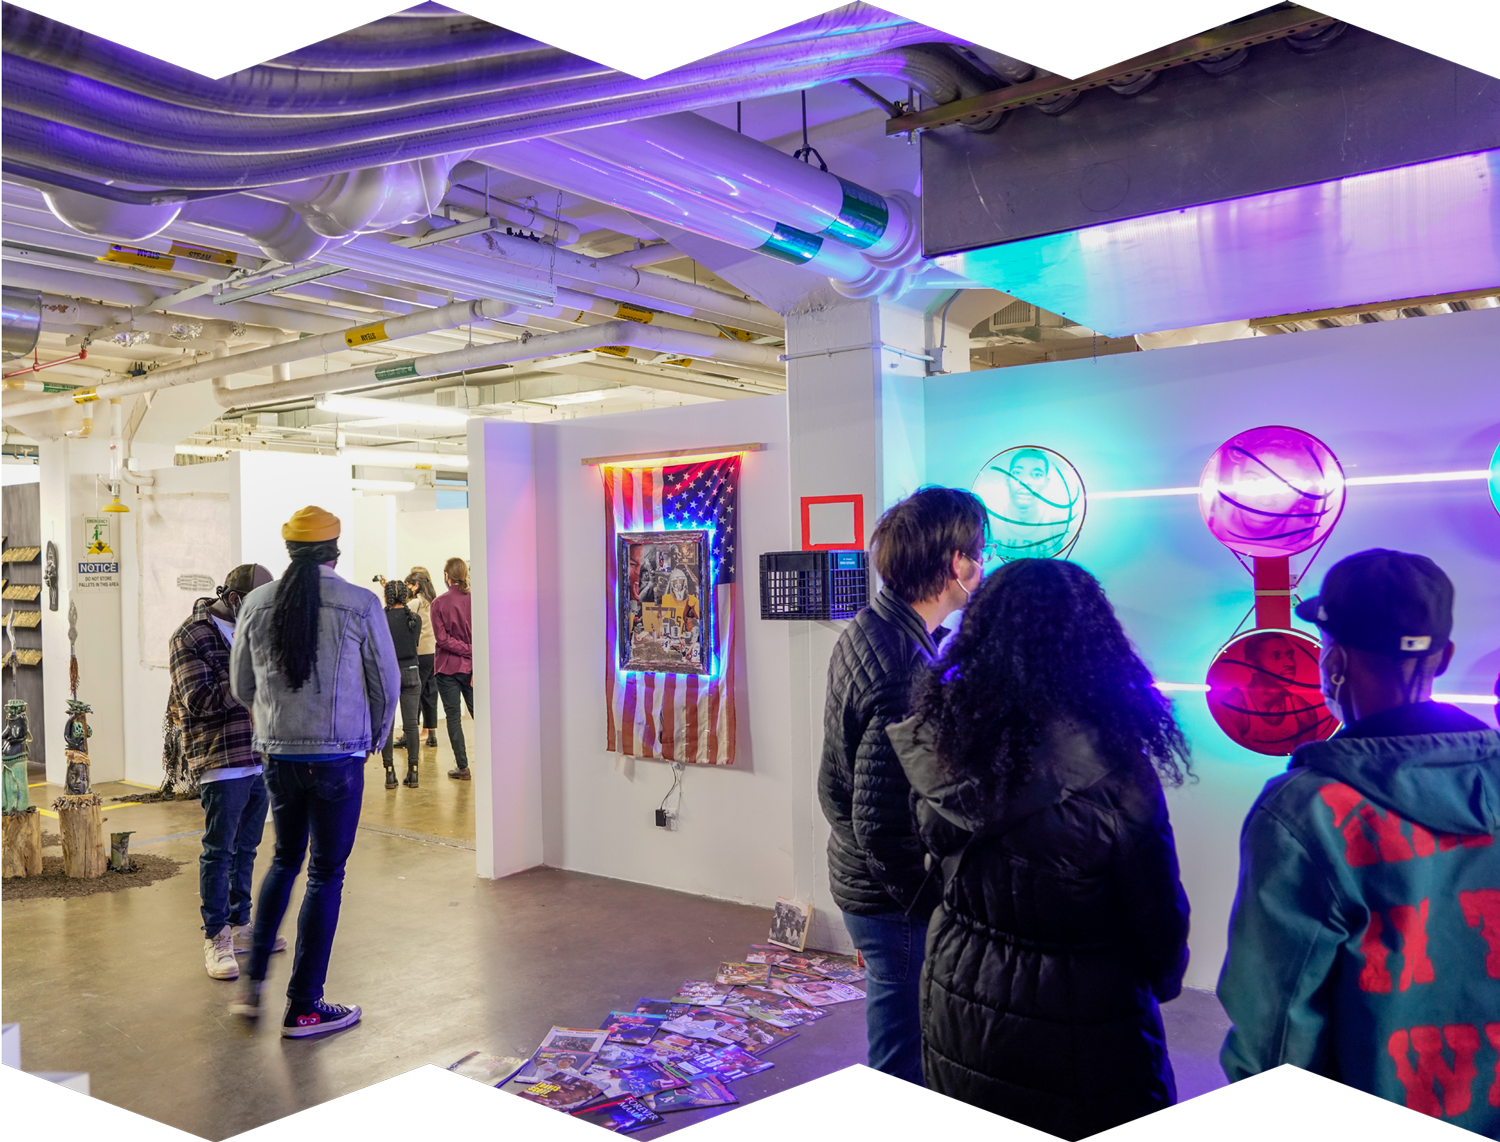 A photograph showing group exhibition of artwork: prints, sculptures, and neon lights. The space is full of people viewing and admiring the work.